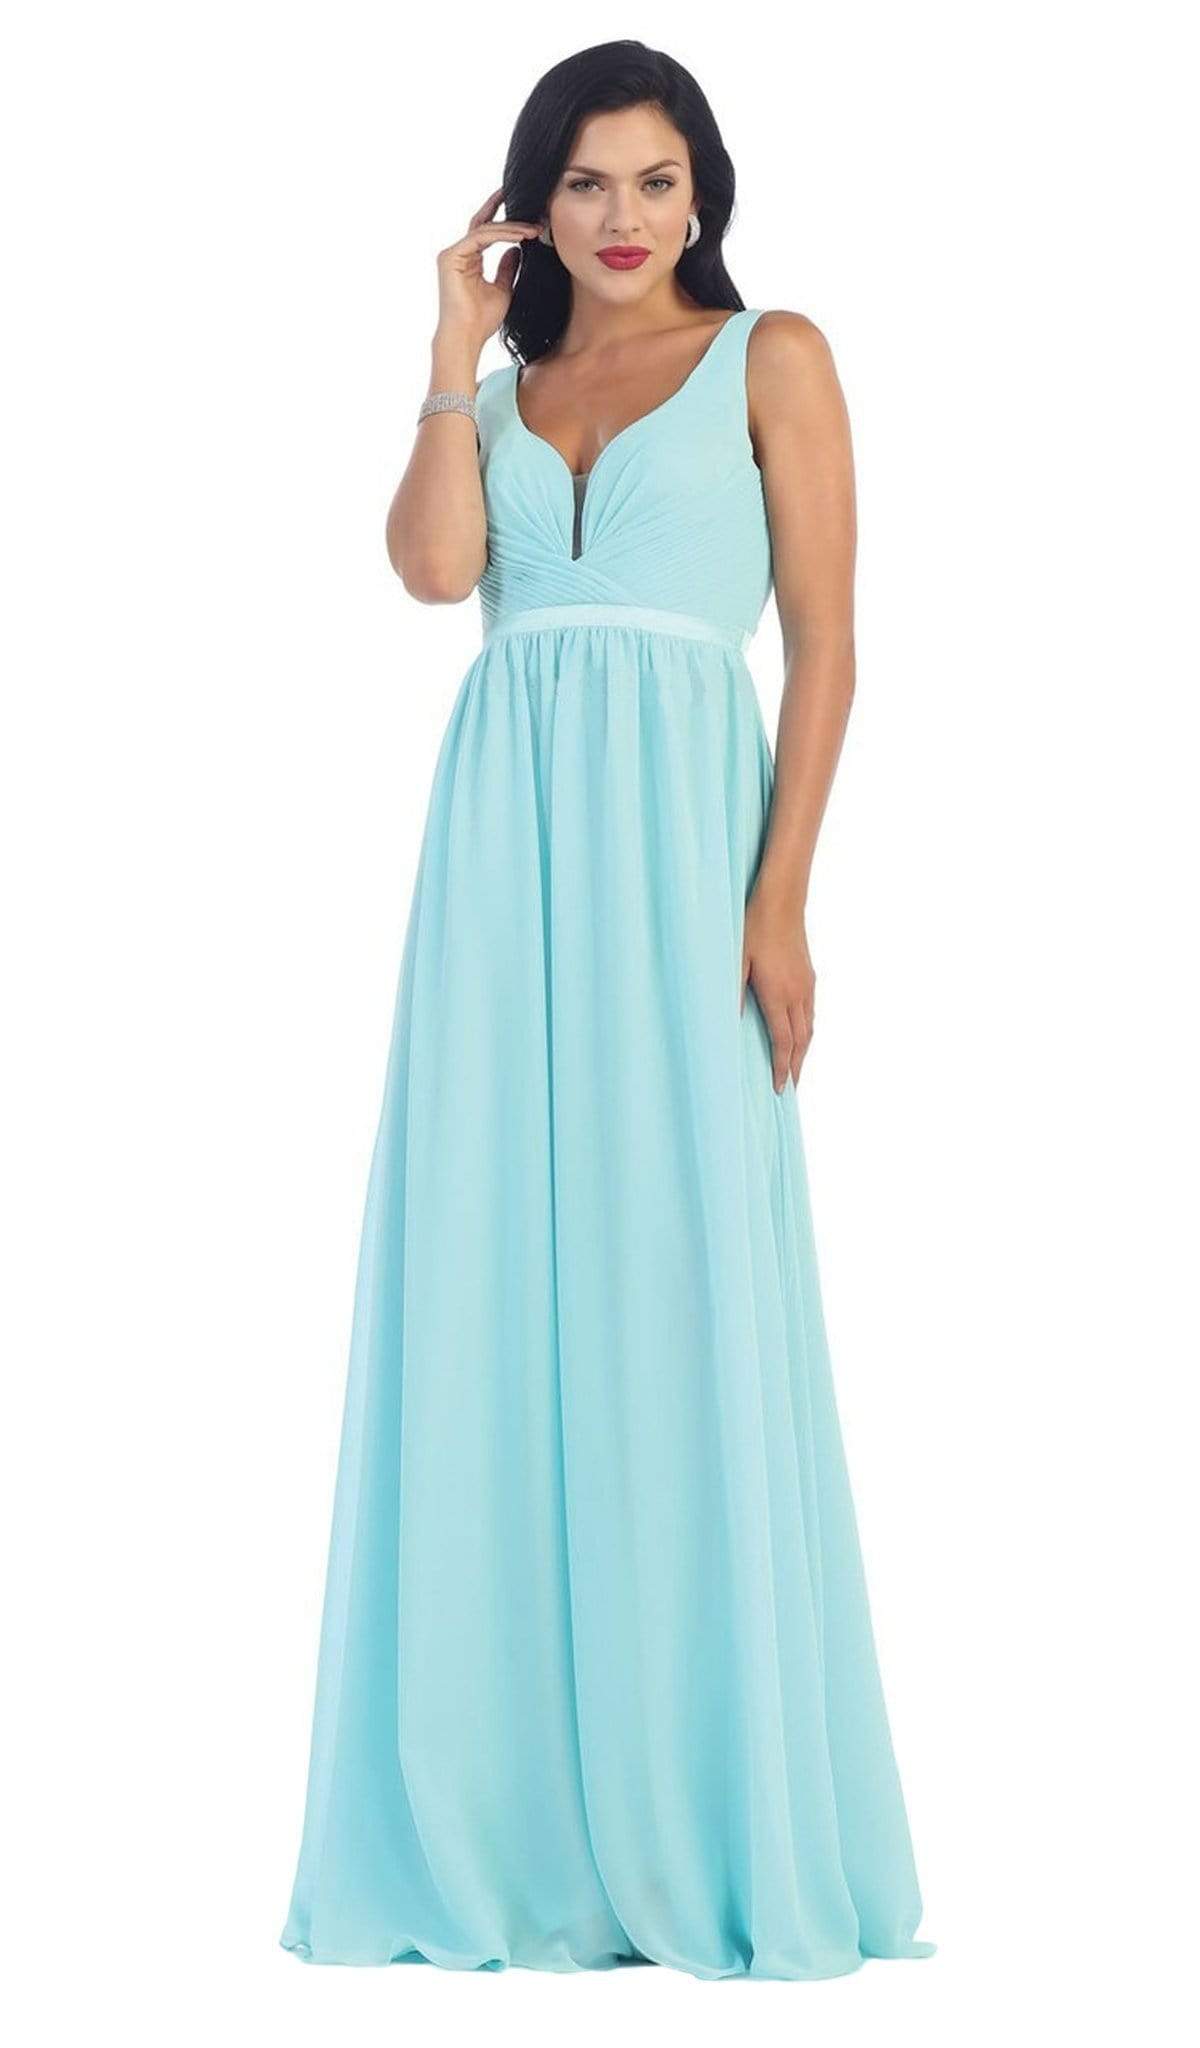 May Queen - MQ1225 Sleeveless Illusion Plunging A-Line Gown
